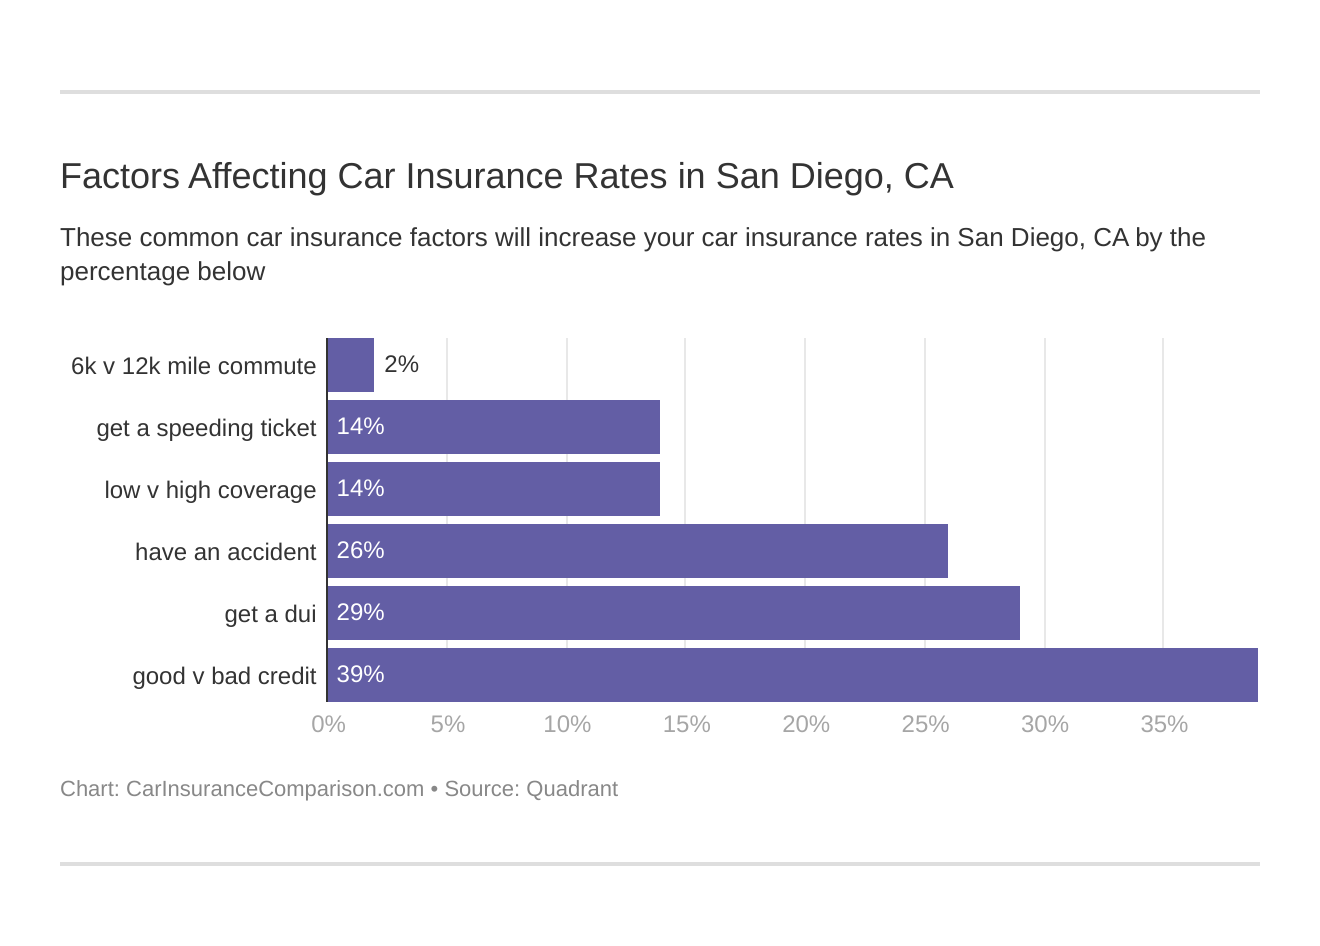 Factors Affecting Car Insurance Rates in San Diego, CA